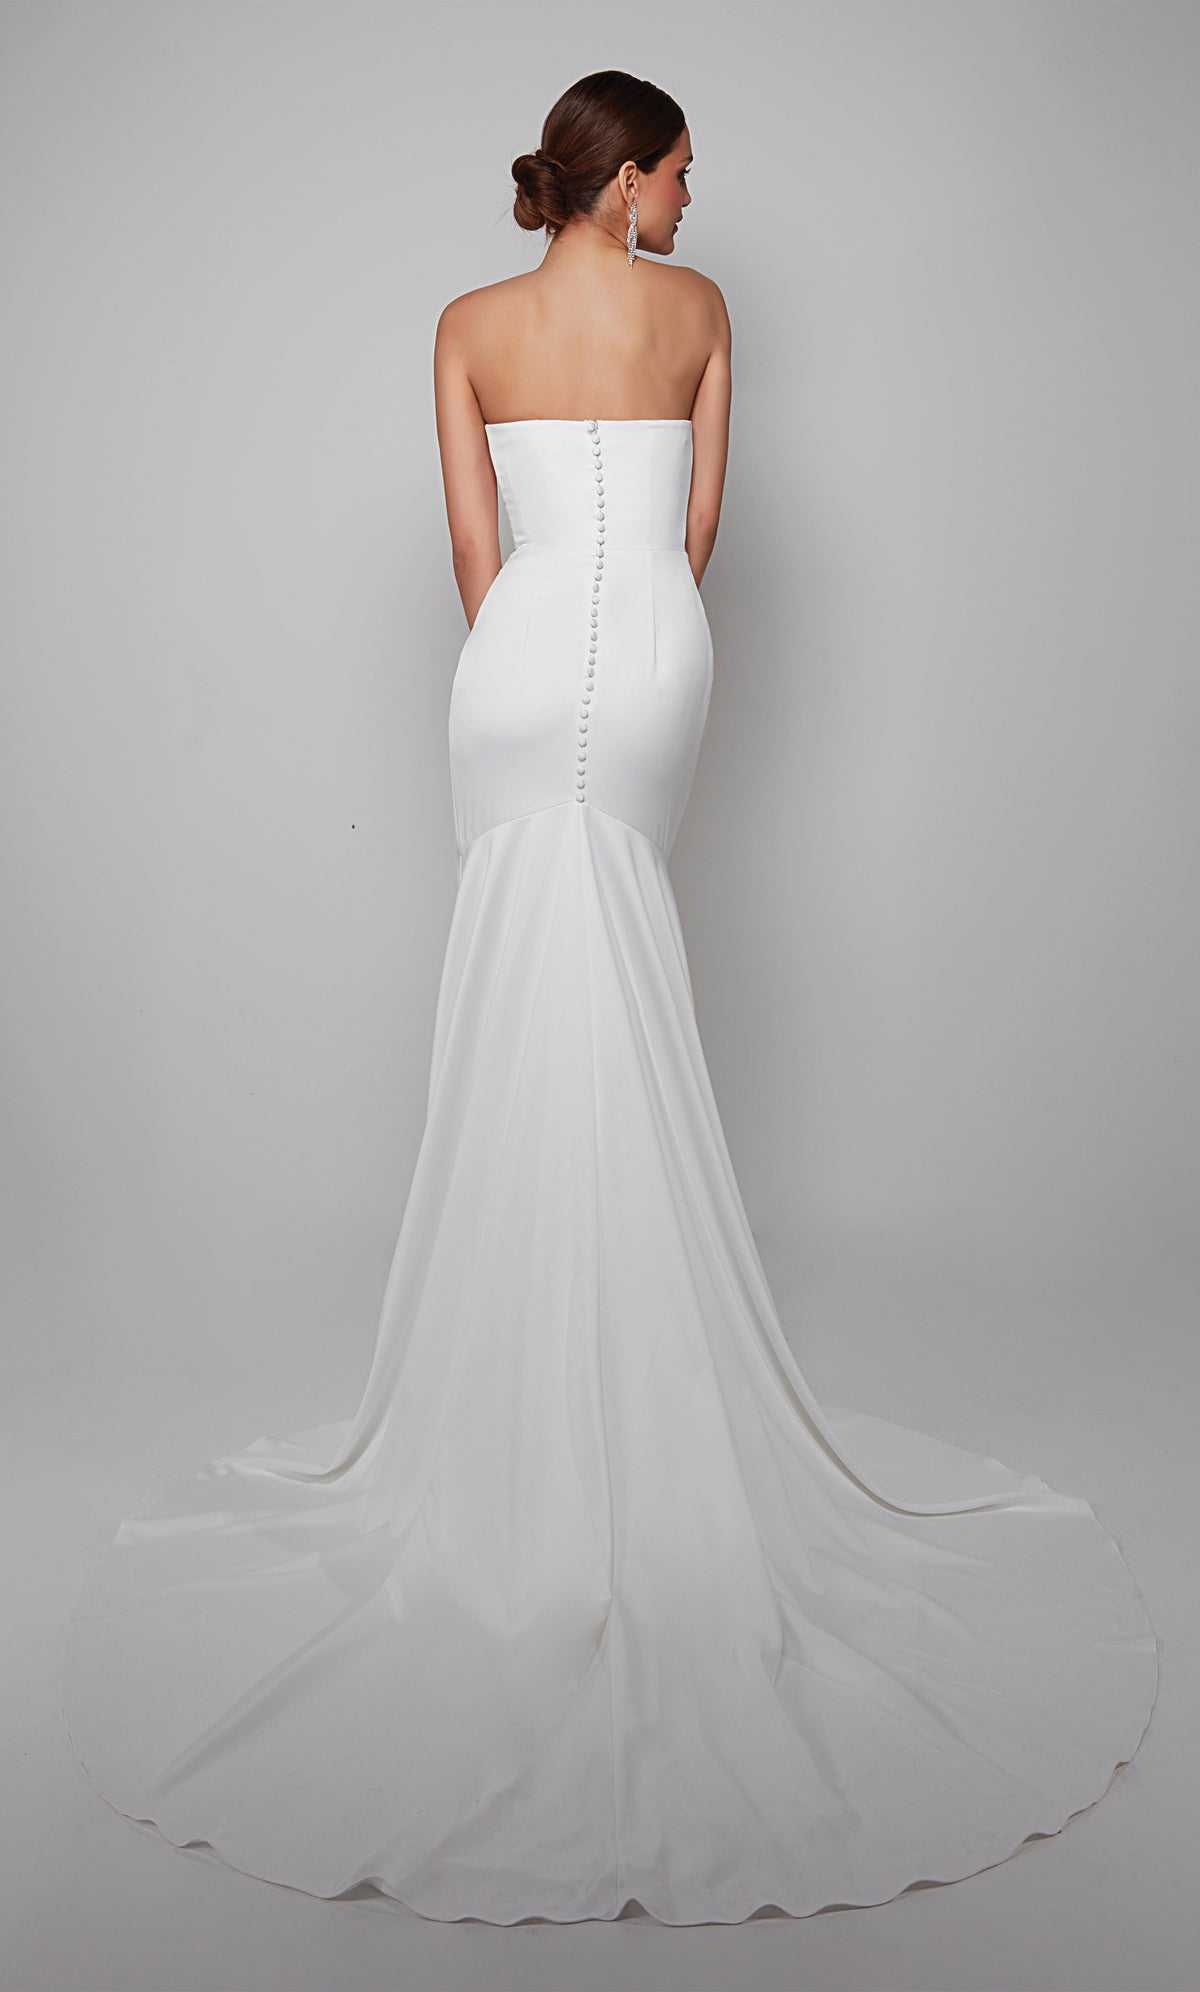 Strapless draped wedding dress with satin covered button closed back cut in our signature diamond white satin fabric.